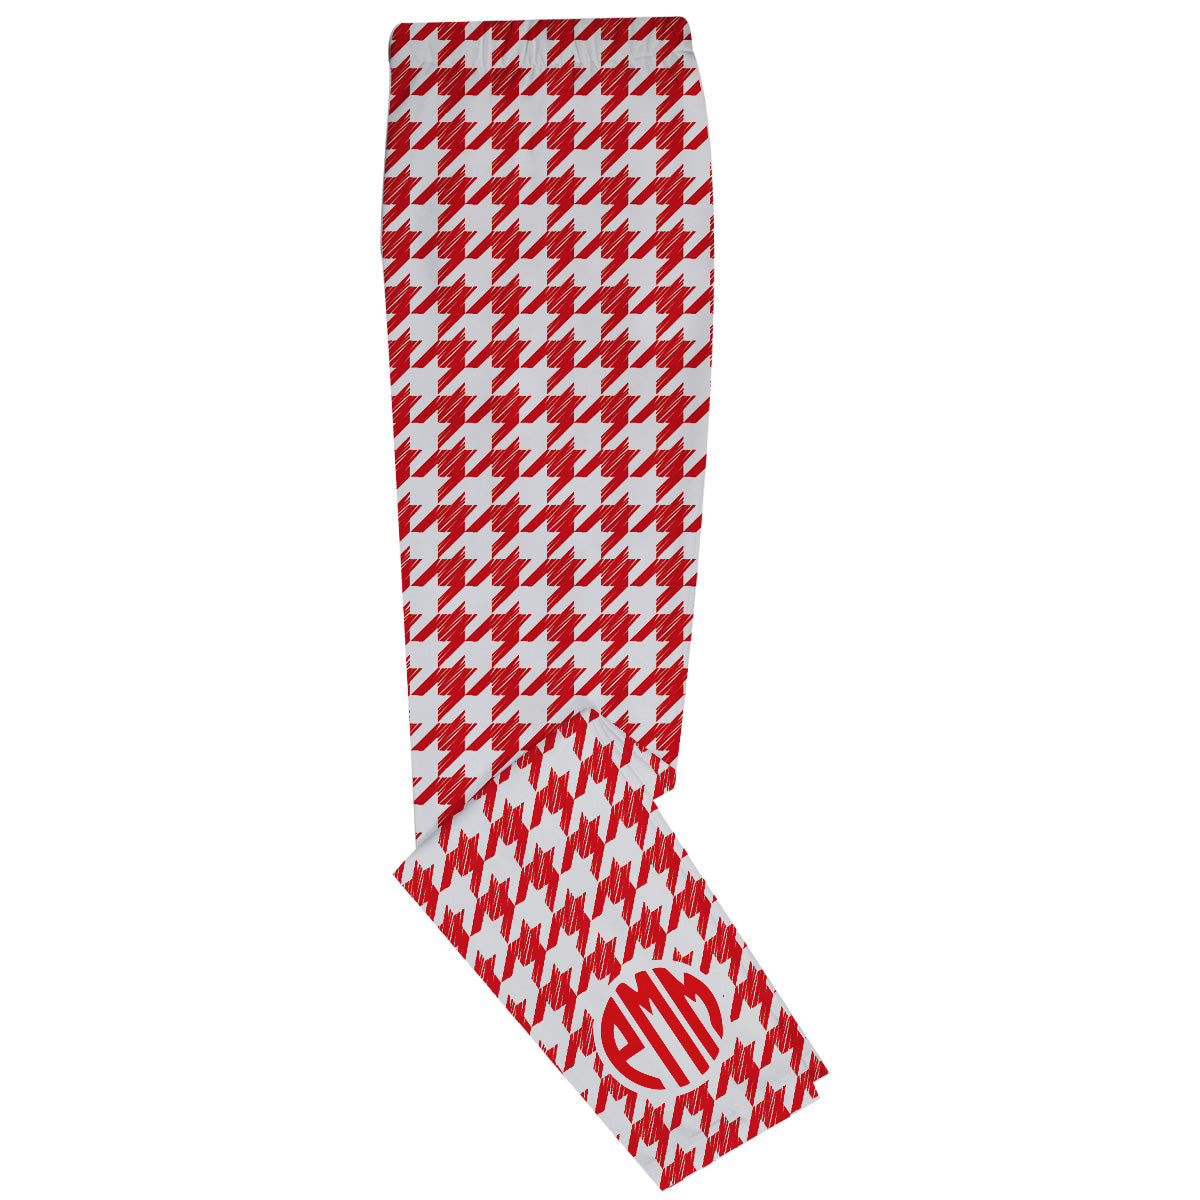 White and red houndstooth girls leggings - Wimziy&Co.